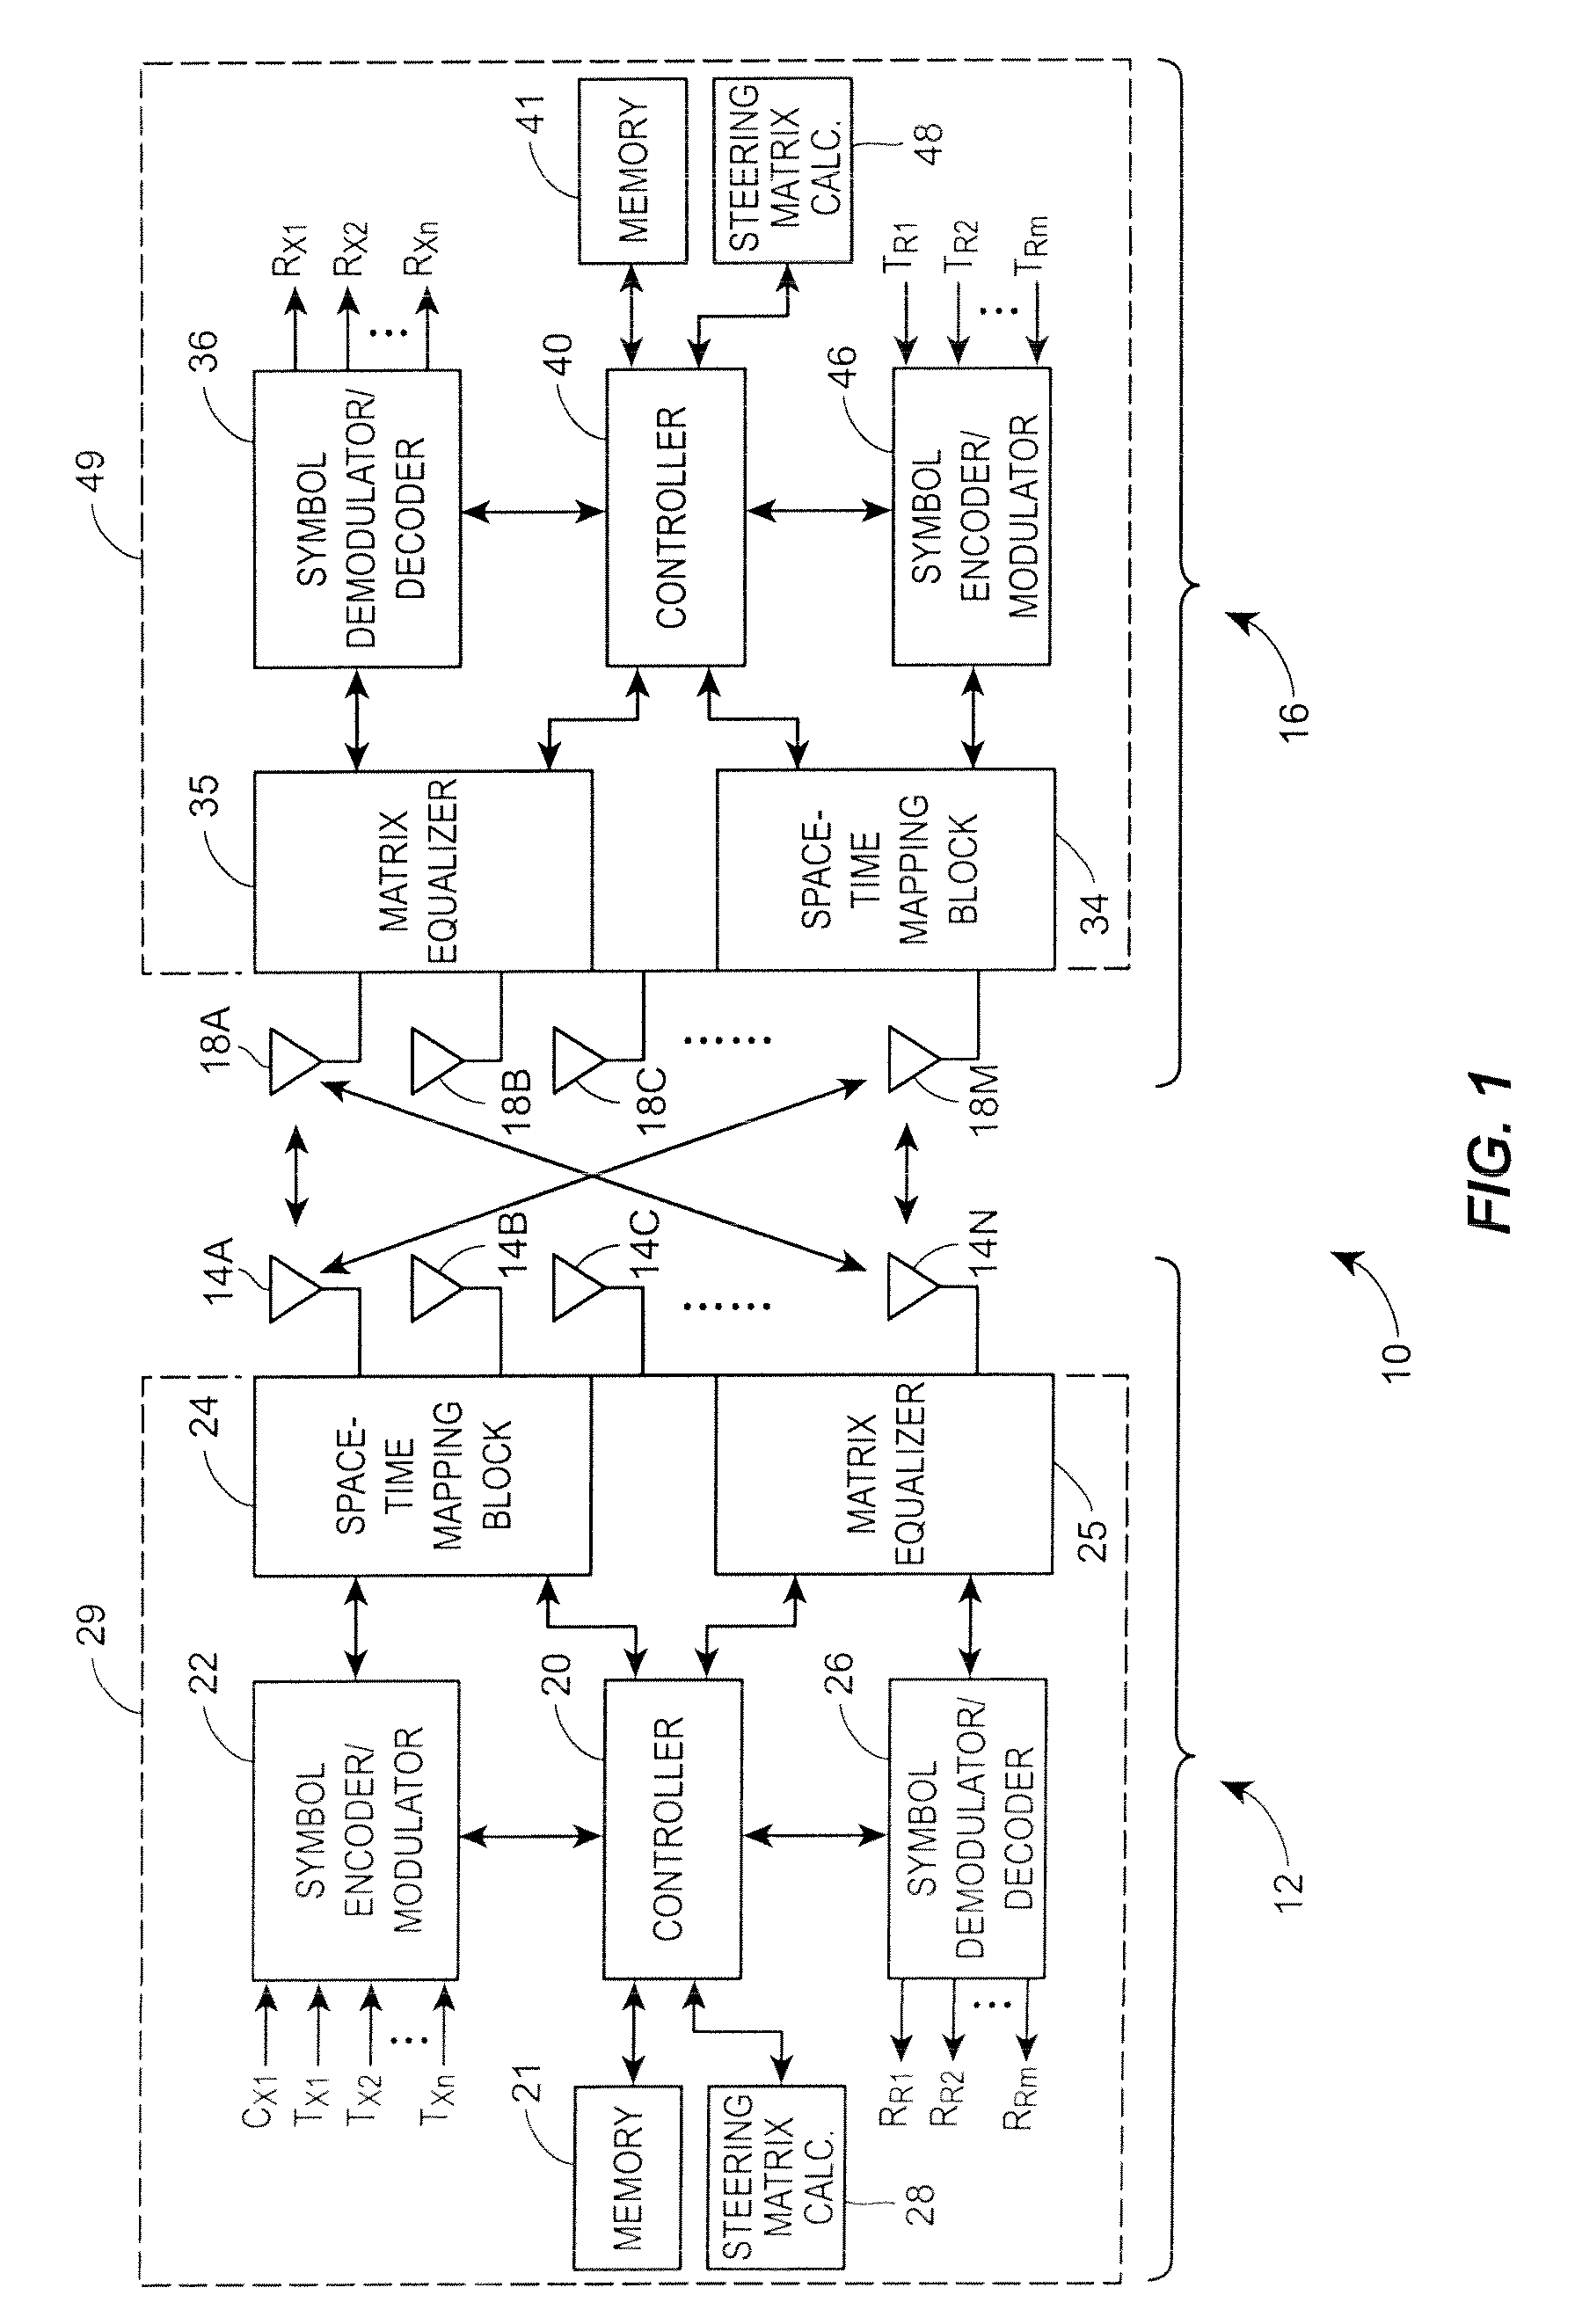 Beamforming to a subset of receive antennas in a wireless MIMO communication system